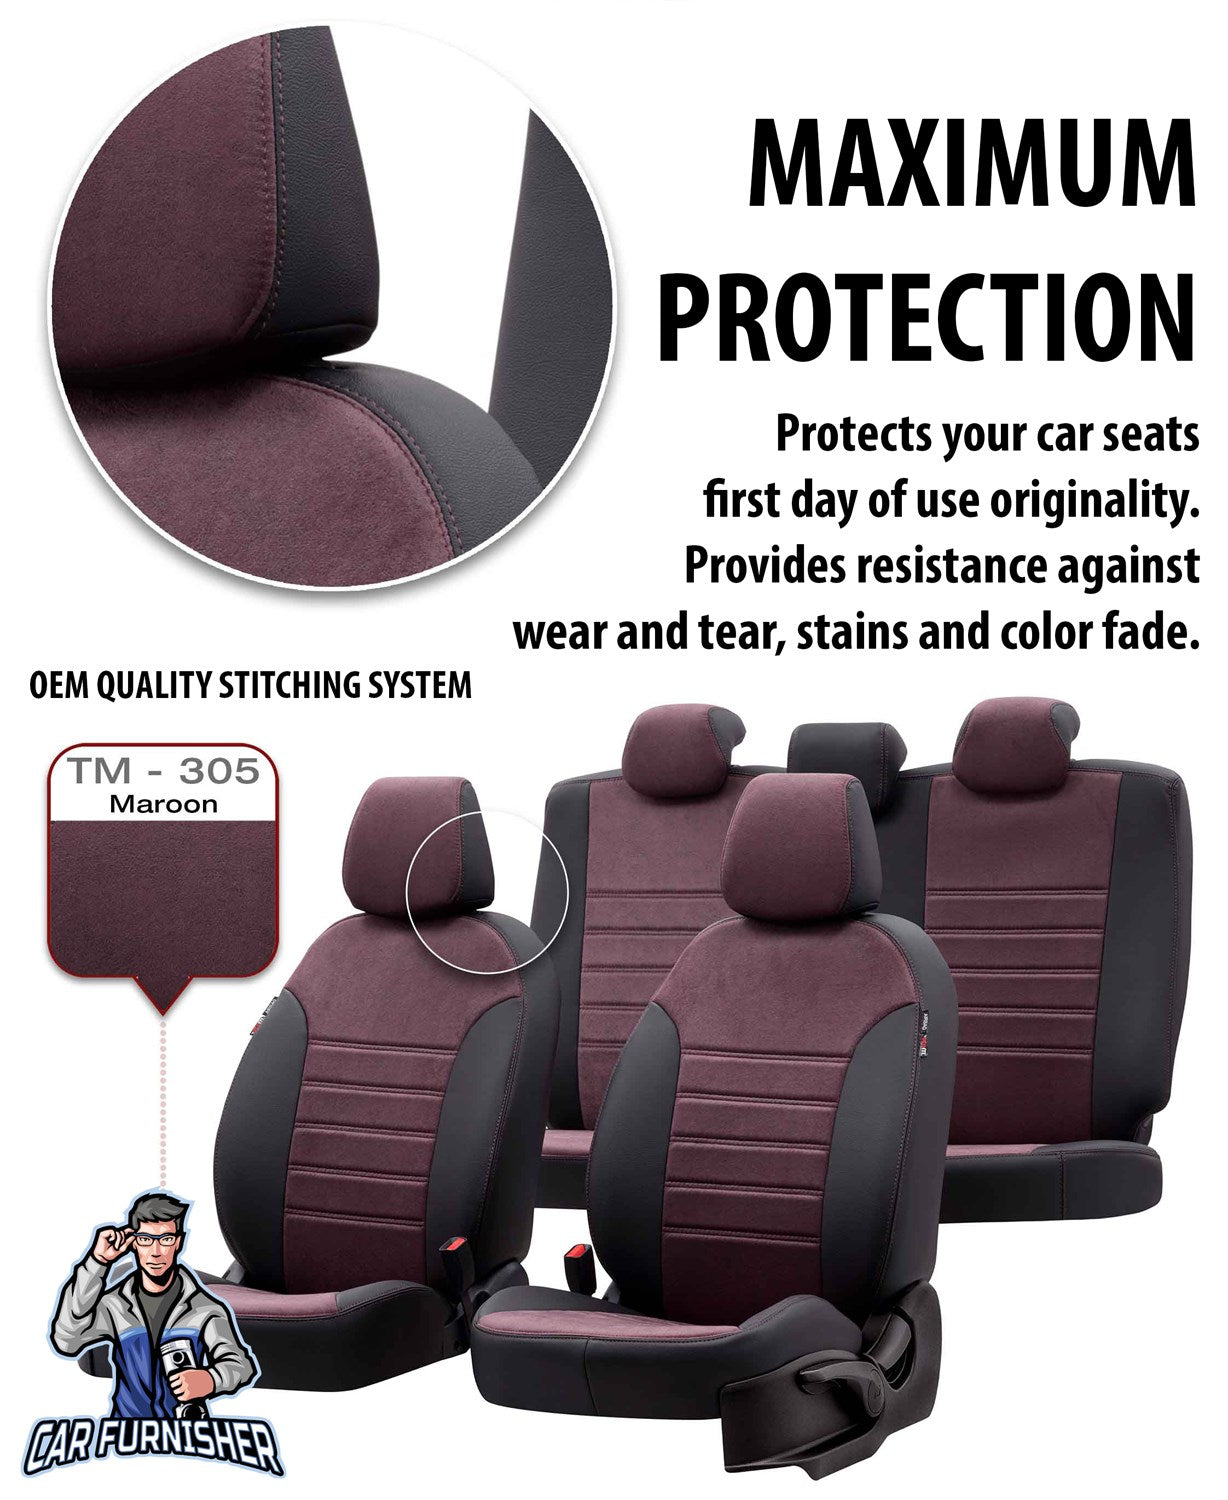 Volkswagen Caravelle Seat Cover Milano Suede Design Black Leather & Suede Fabric